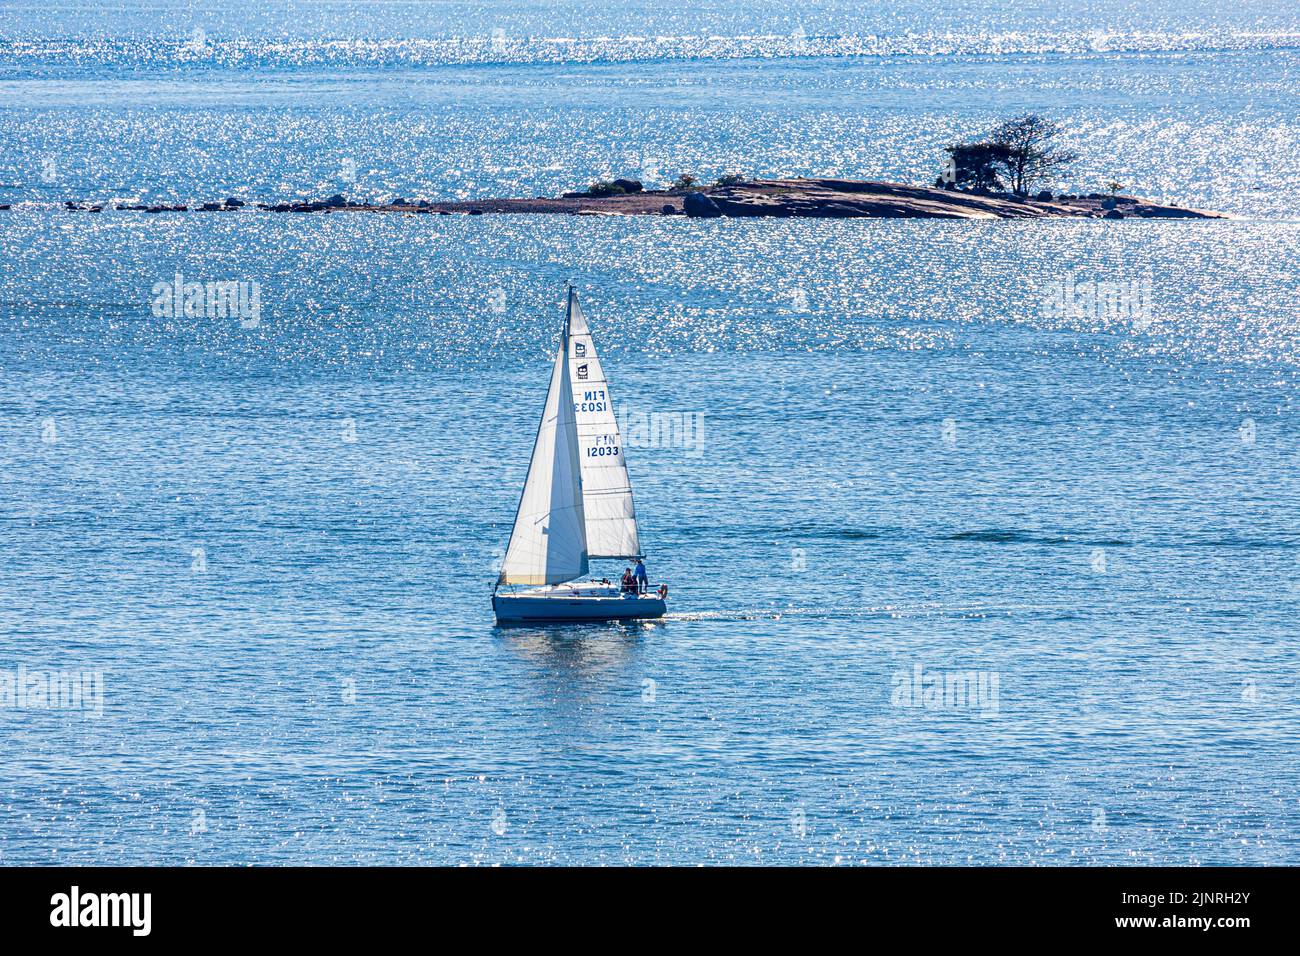 A yacht sailing in the Gulf of Finland off Helsinki, Finland Stock Photo